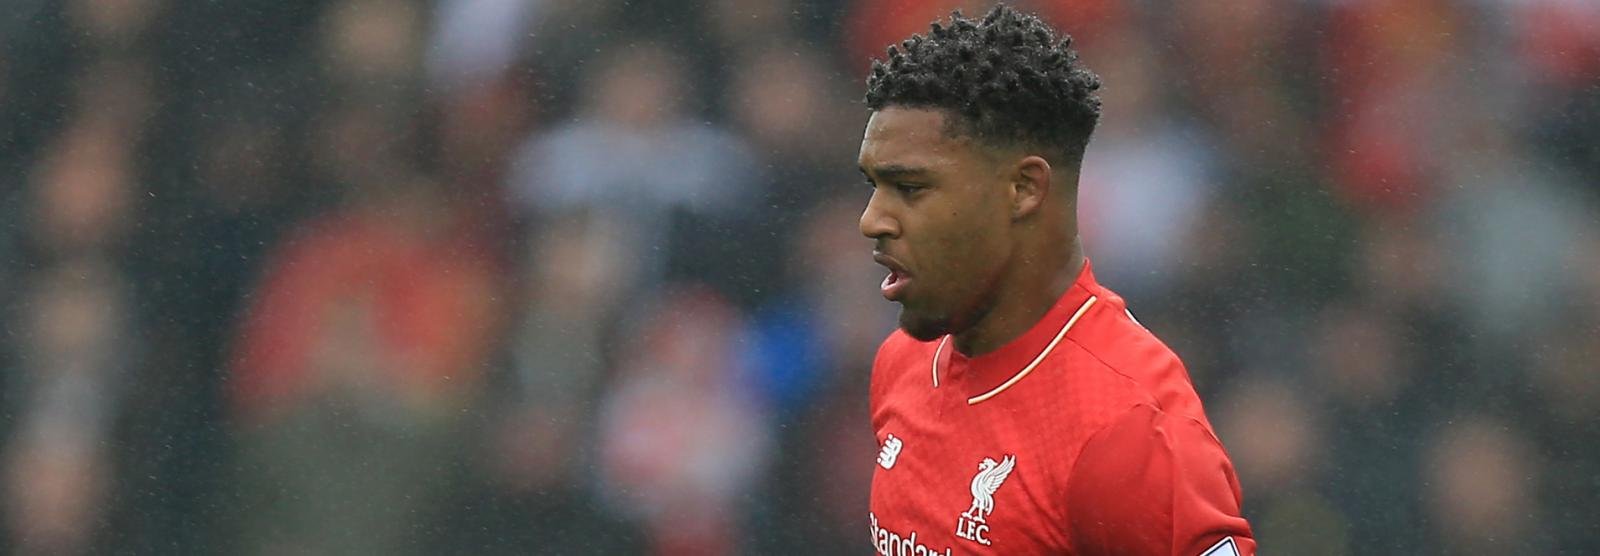 Done Deal: AFC Bournemouth seal club-record £15m capture of Liverpool’s Jordon Ibe